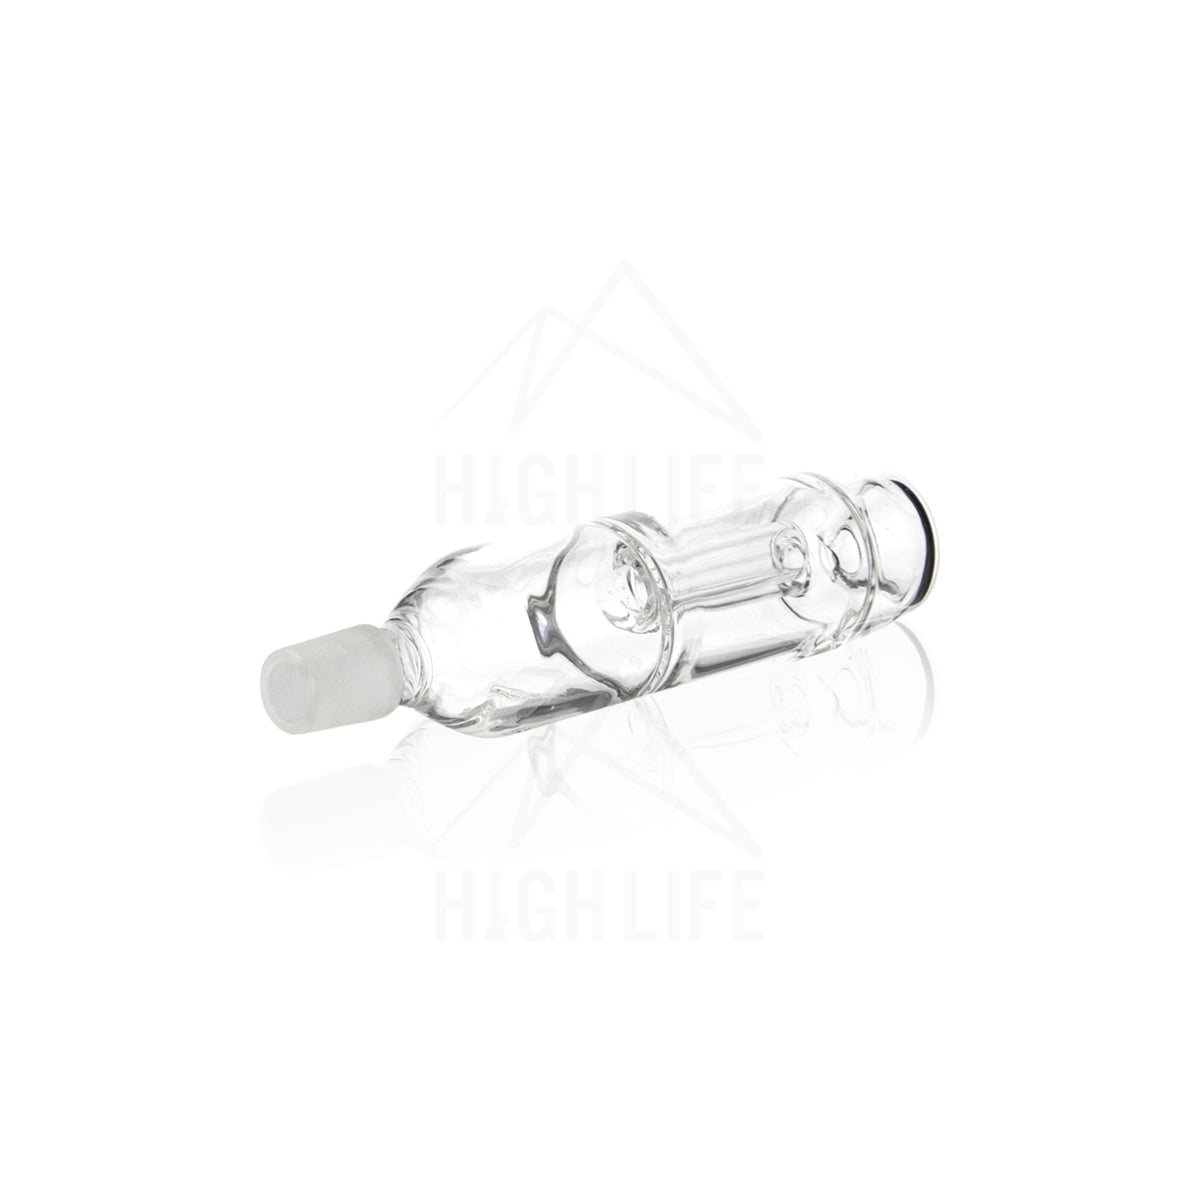 Four-Handle Amber Ash Catcher - 19mm/19mm